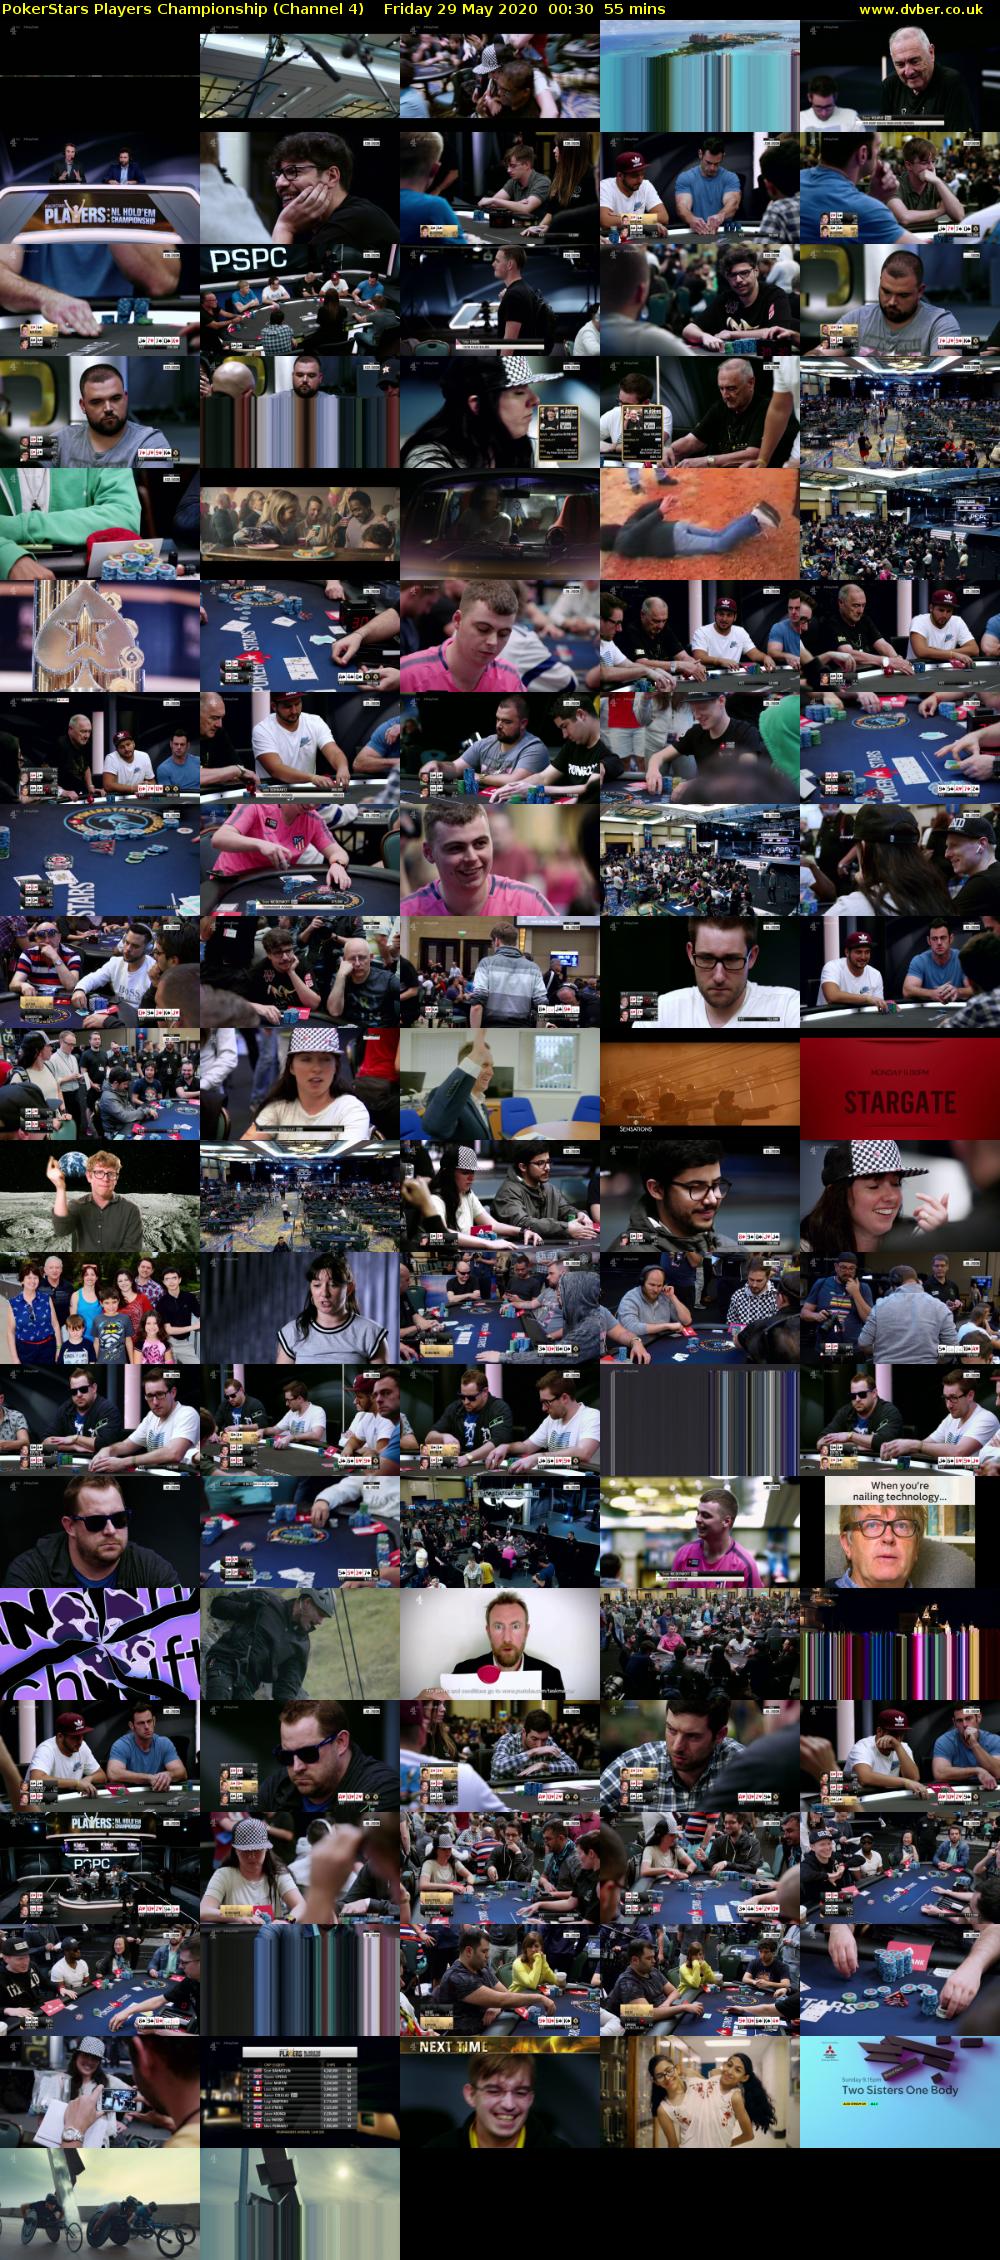 PokerStars Players Championship (Channel 4) Friday 29 May 2020 00:30 - 01:25